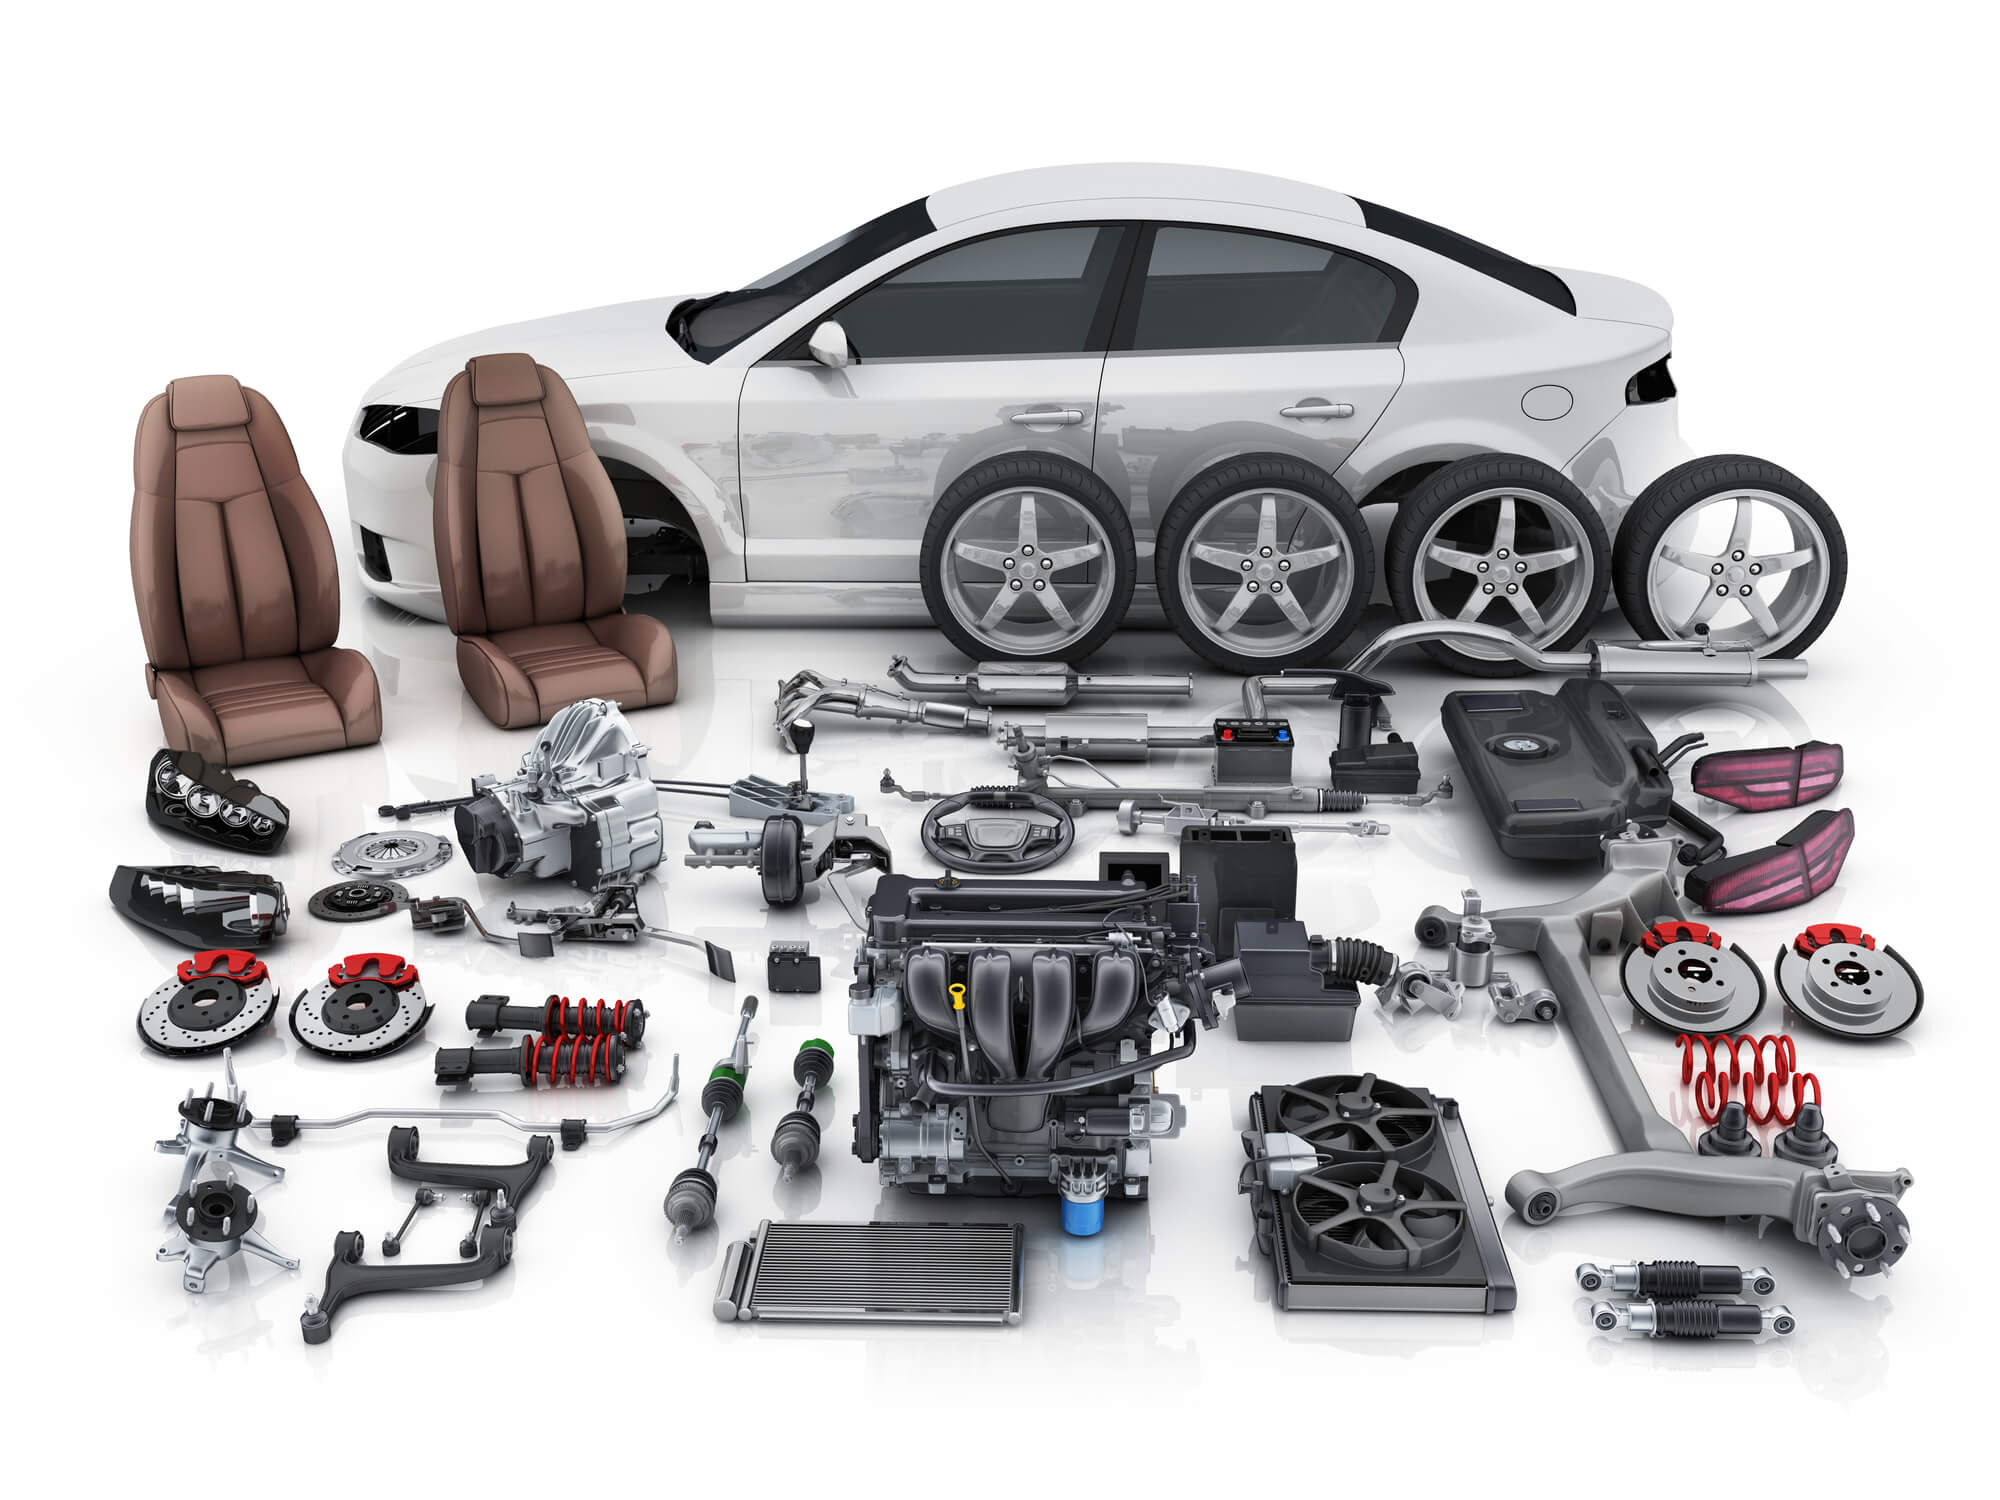 Selling auto parts online